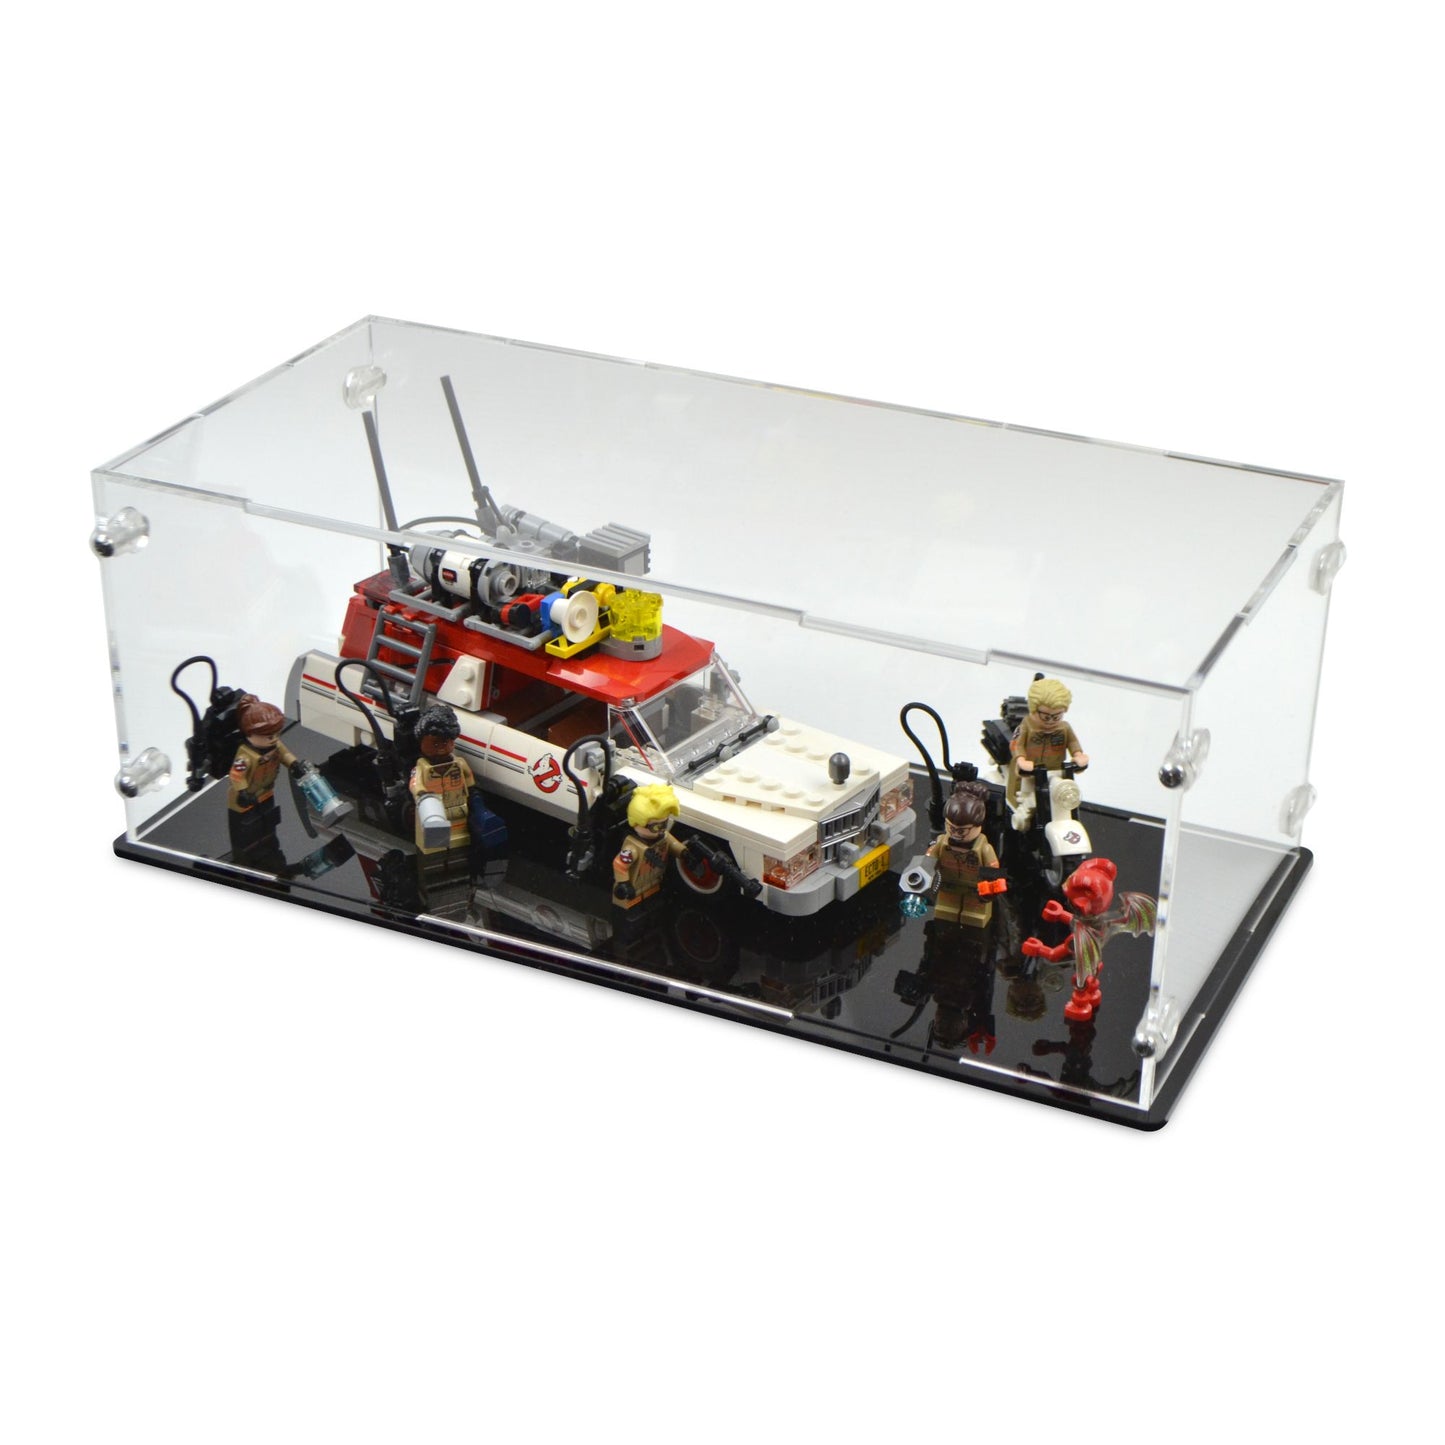 75828 Ghostbusters Ecto-1 & 2 Display Case